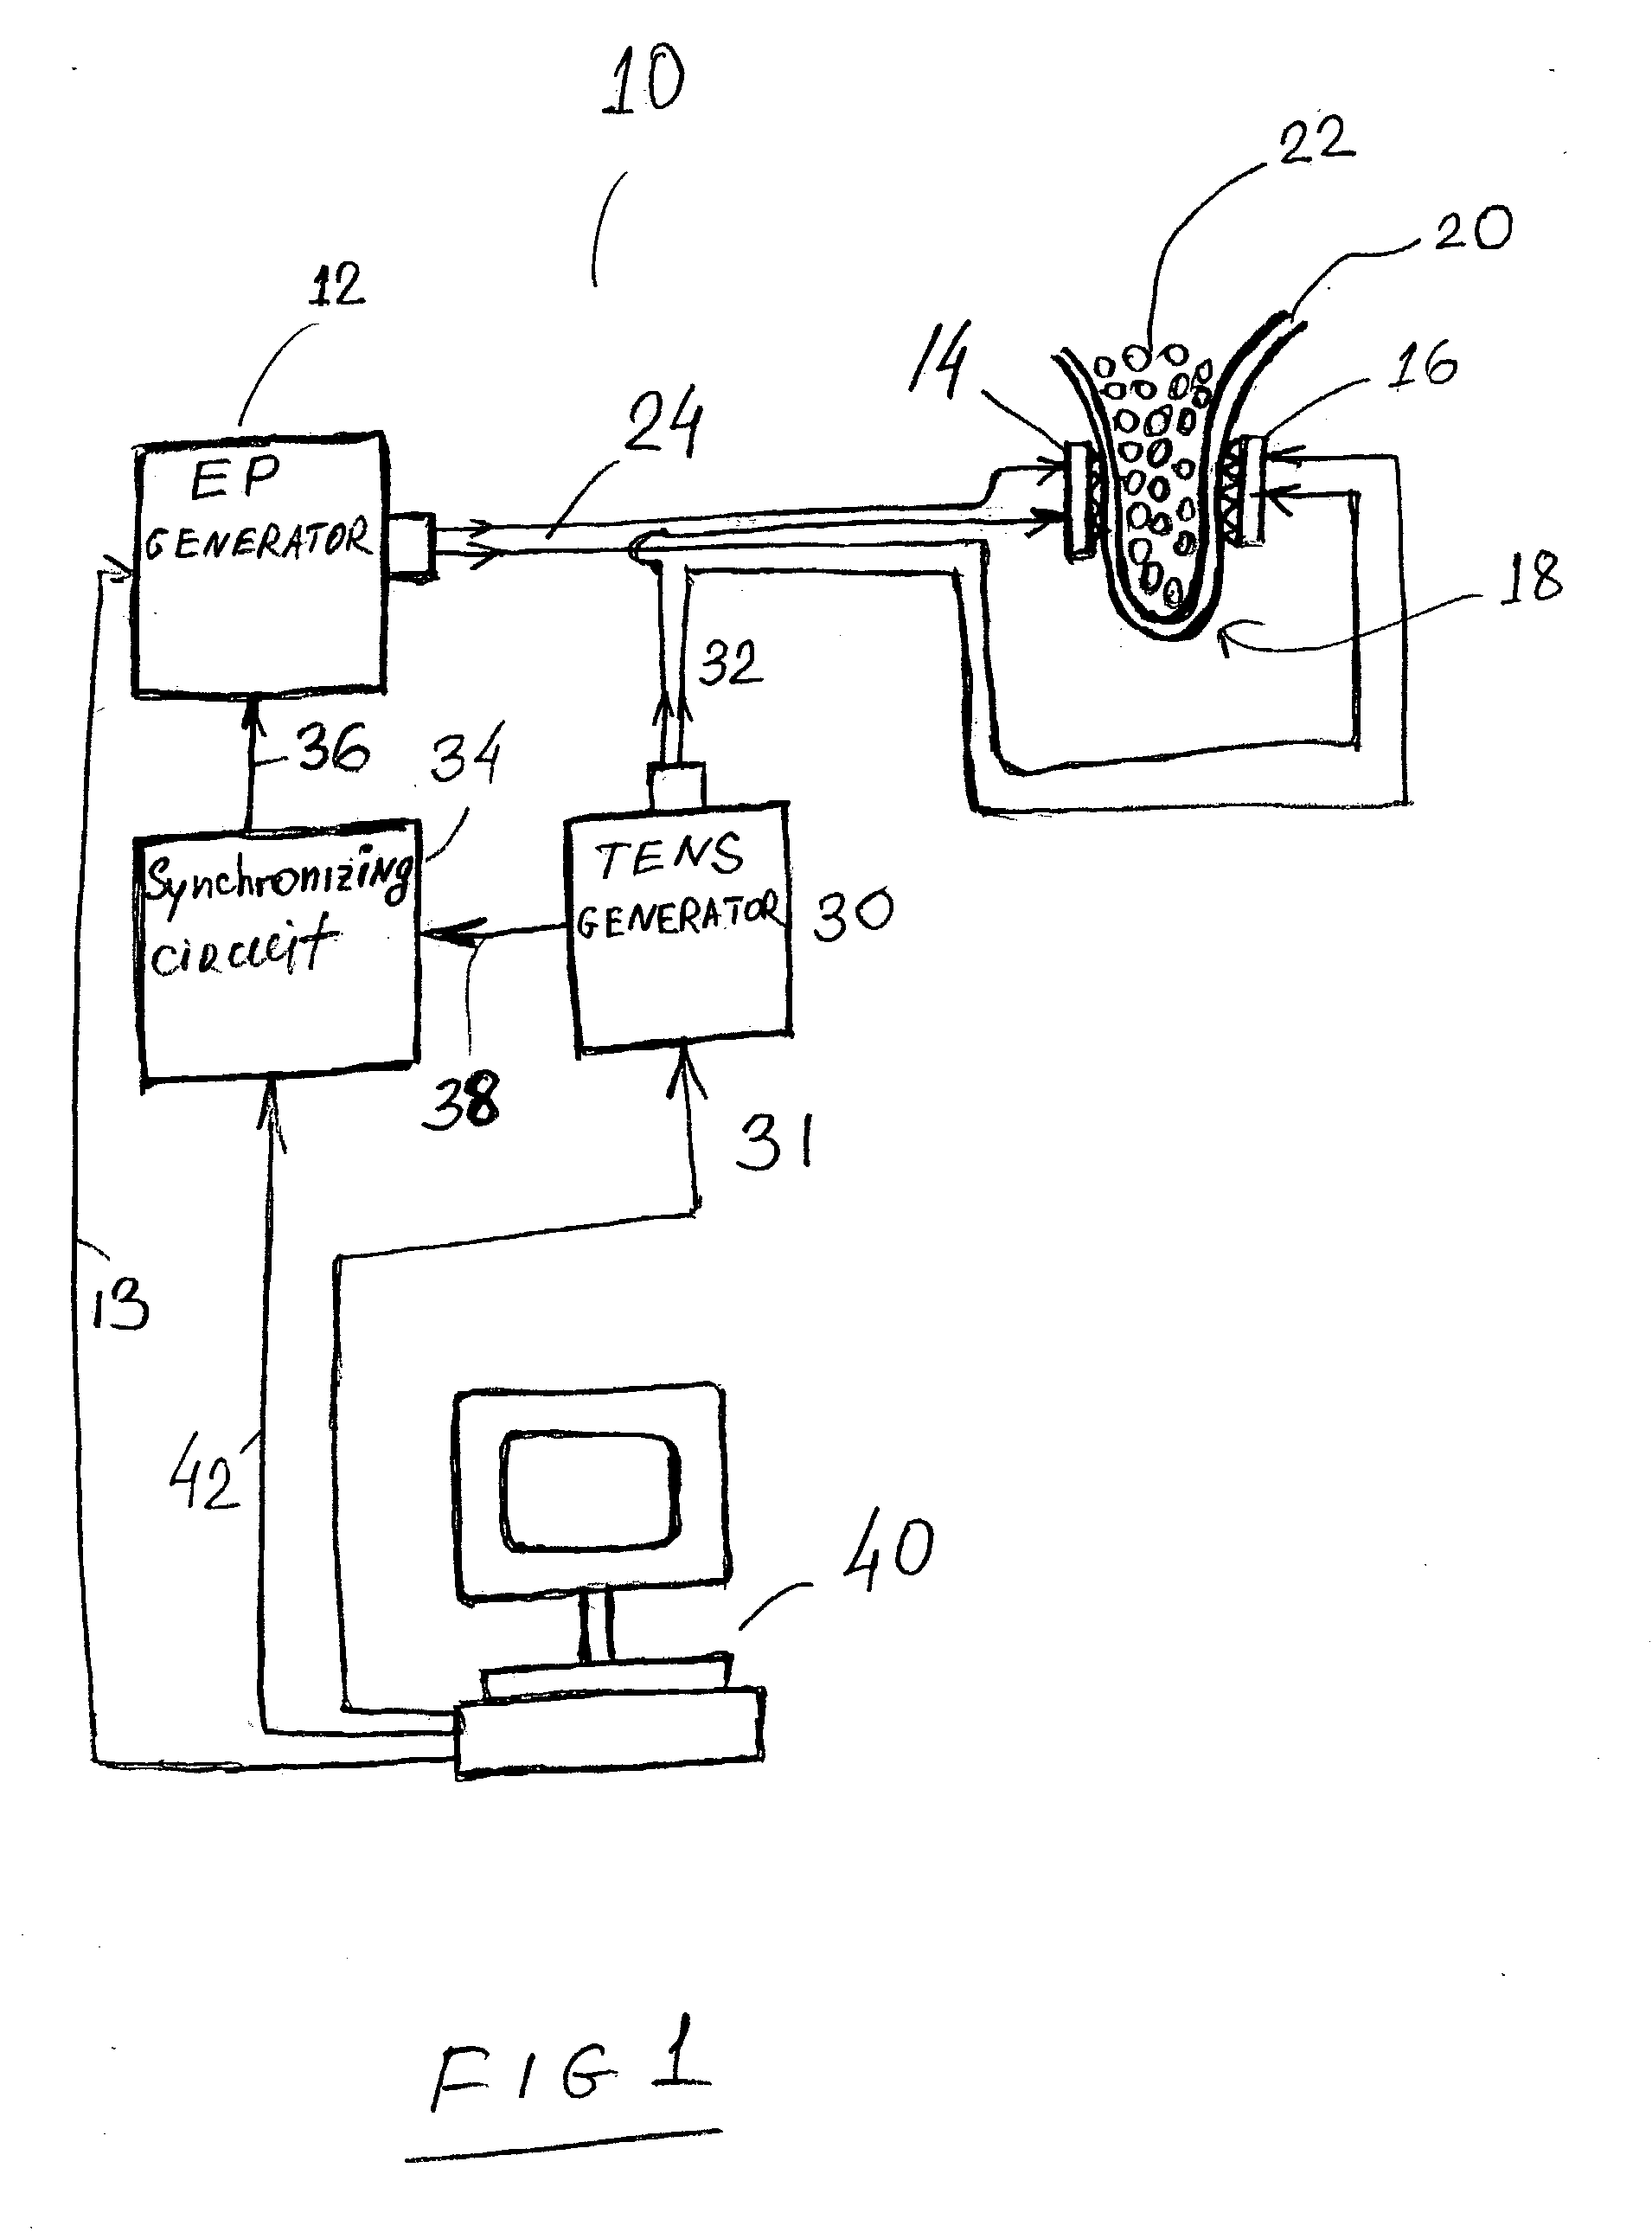 Apparatus and method for reducing subcutaneous fat deposits by electroporation with improved comfort of patients